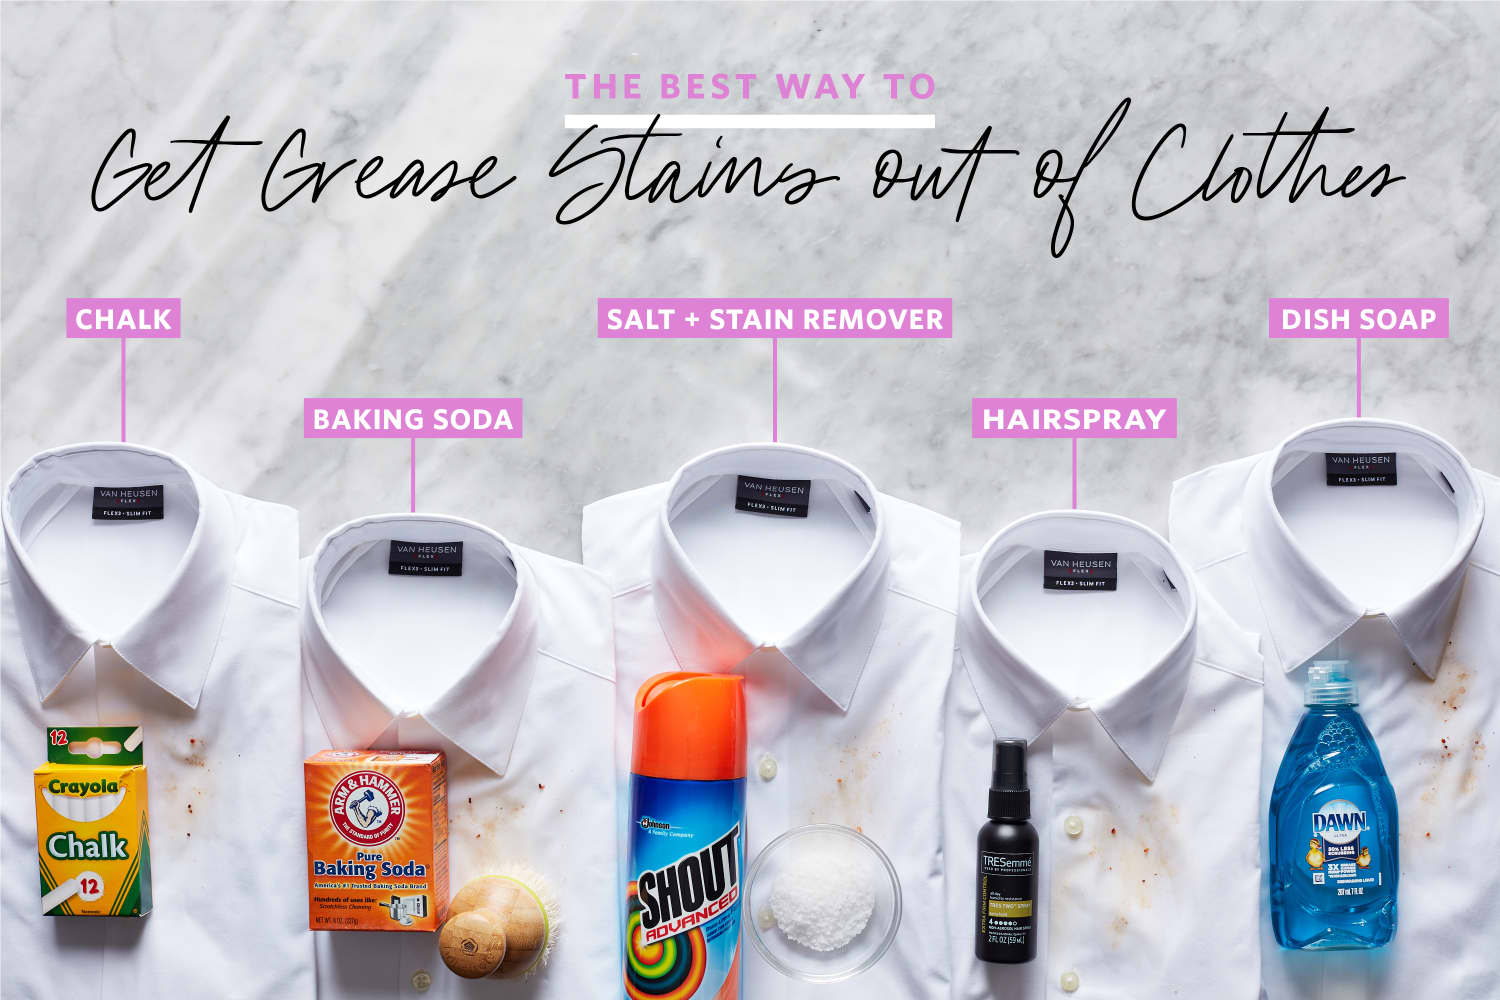 how to get grease stain out of dress